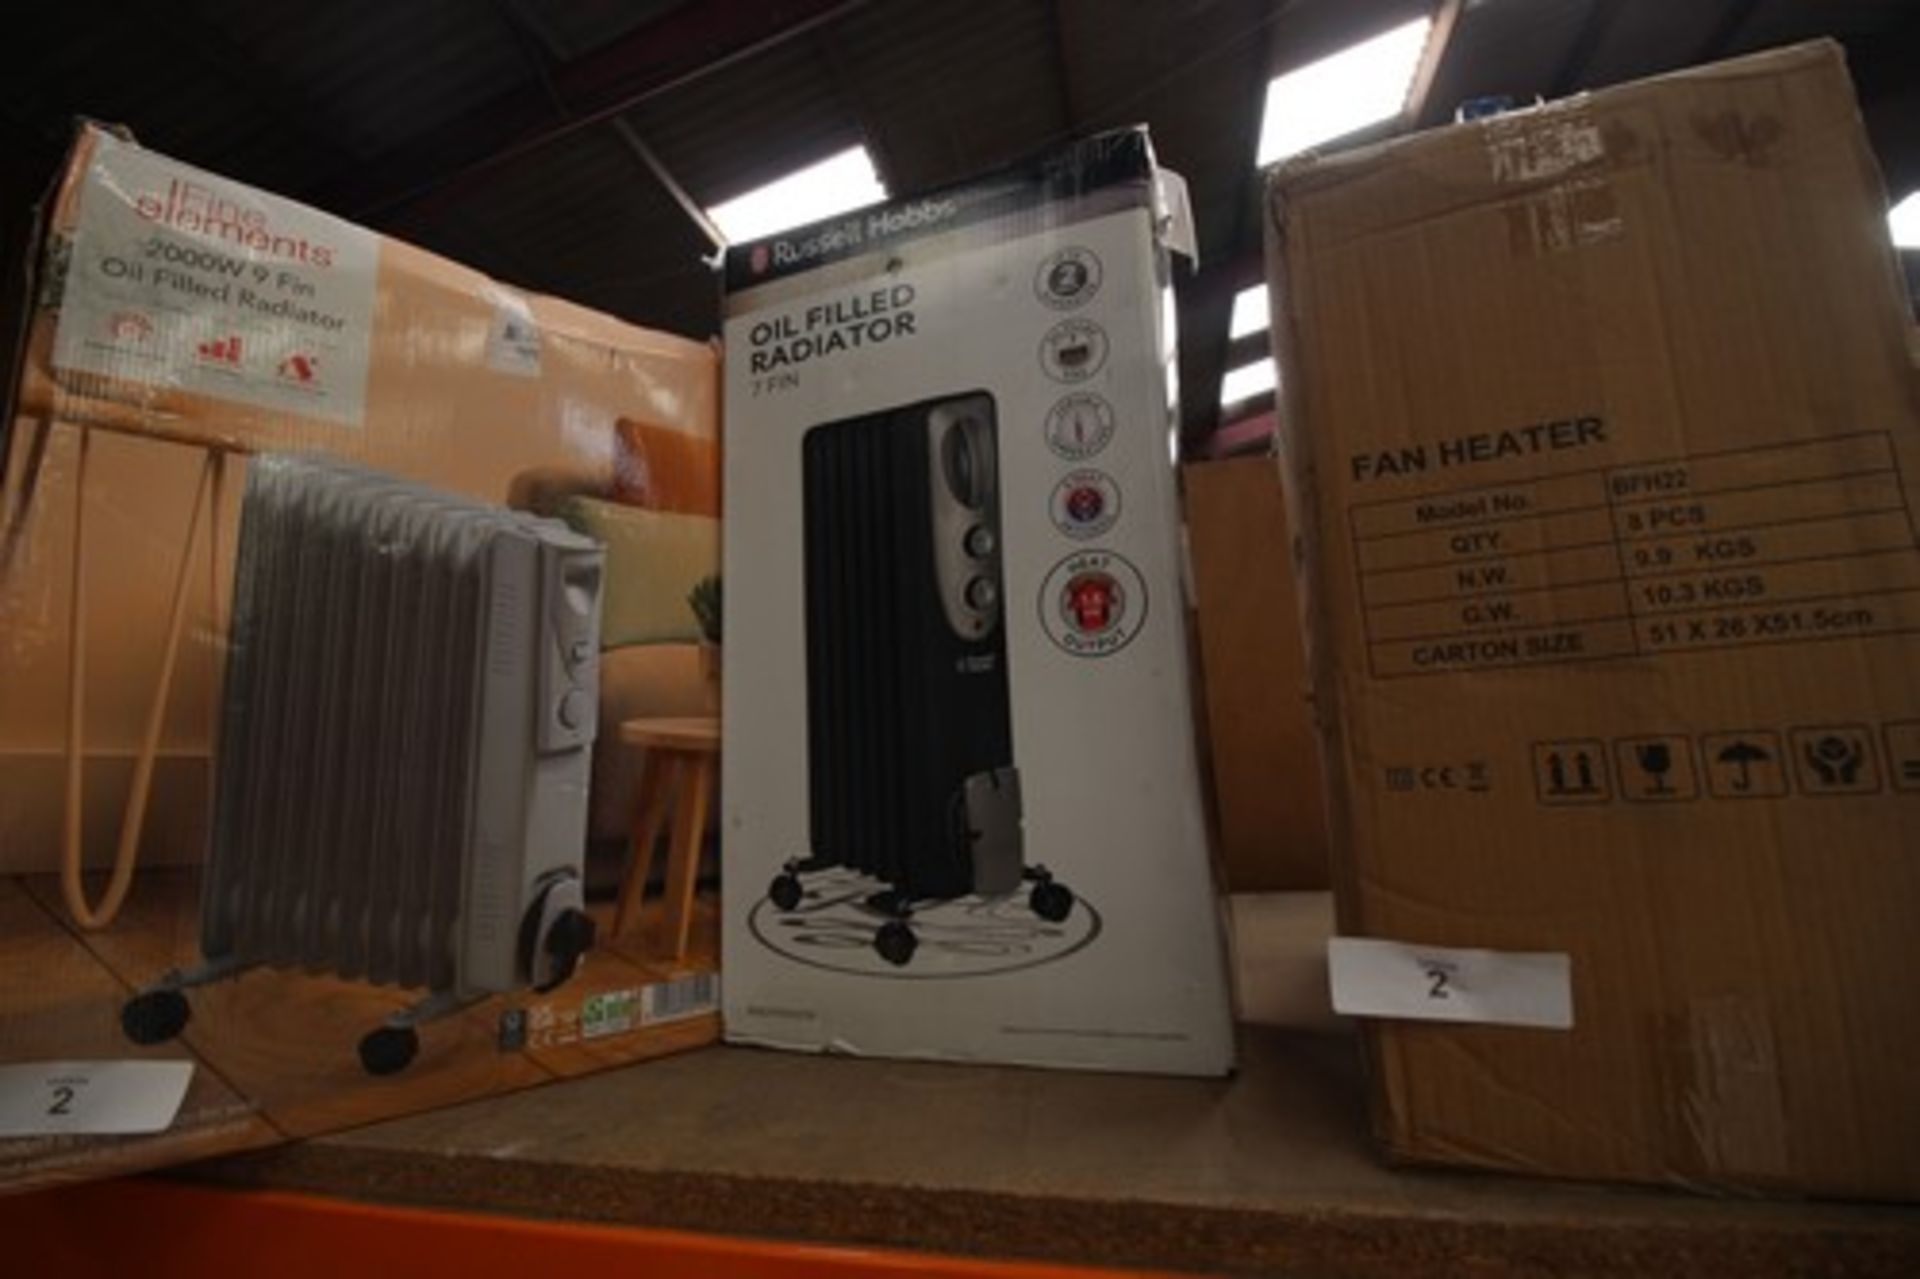 A selection of heaters, including Russell Hobbs 7 fin oil filled heaters and 8 x Belaco fan heaters,